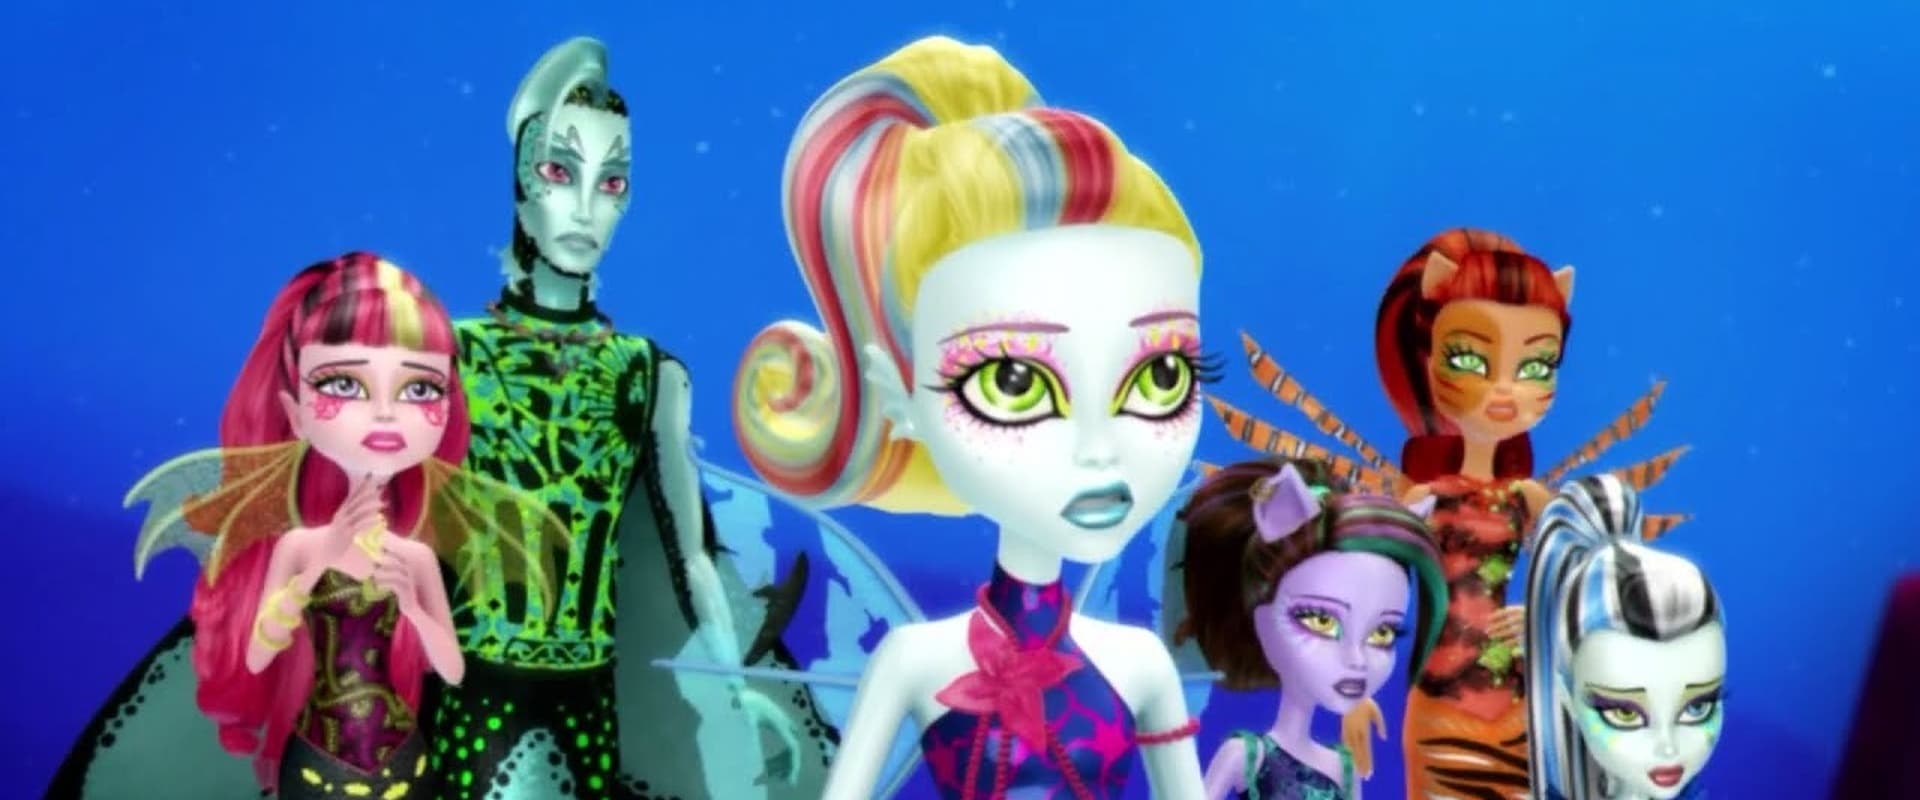 Monster High: Groot Griezelrif